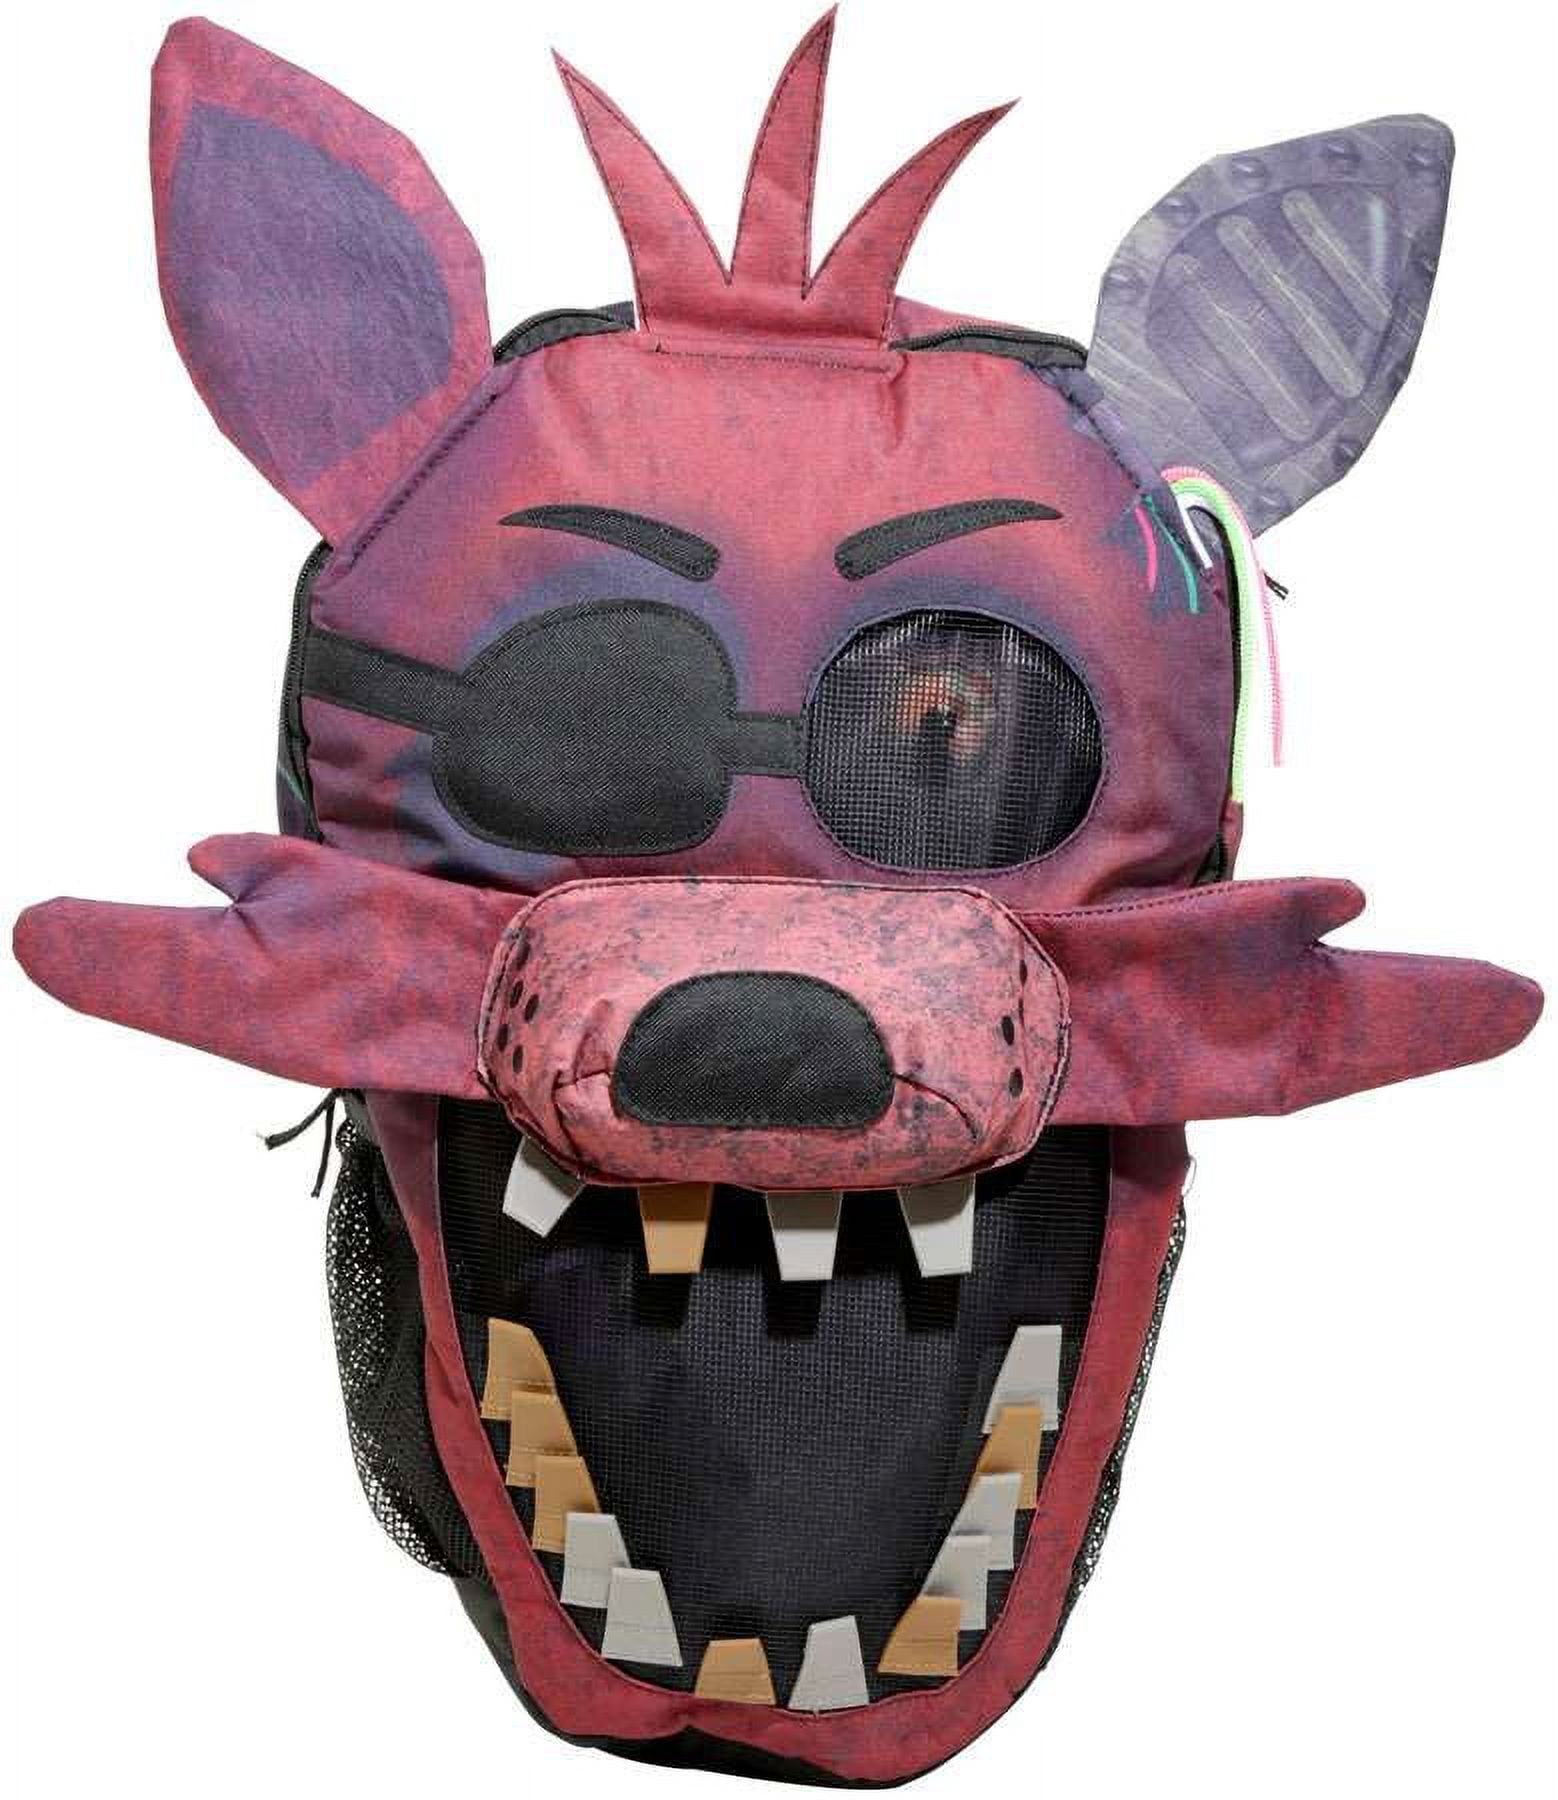 Five Nights at Freddy's - Foxy The Pirate Fox | Greeting Card